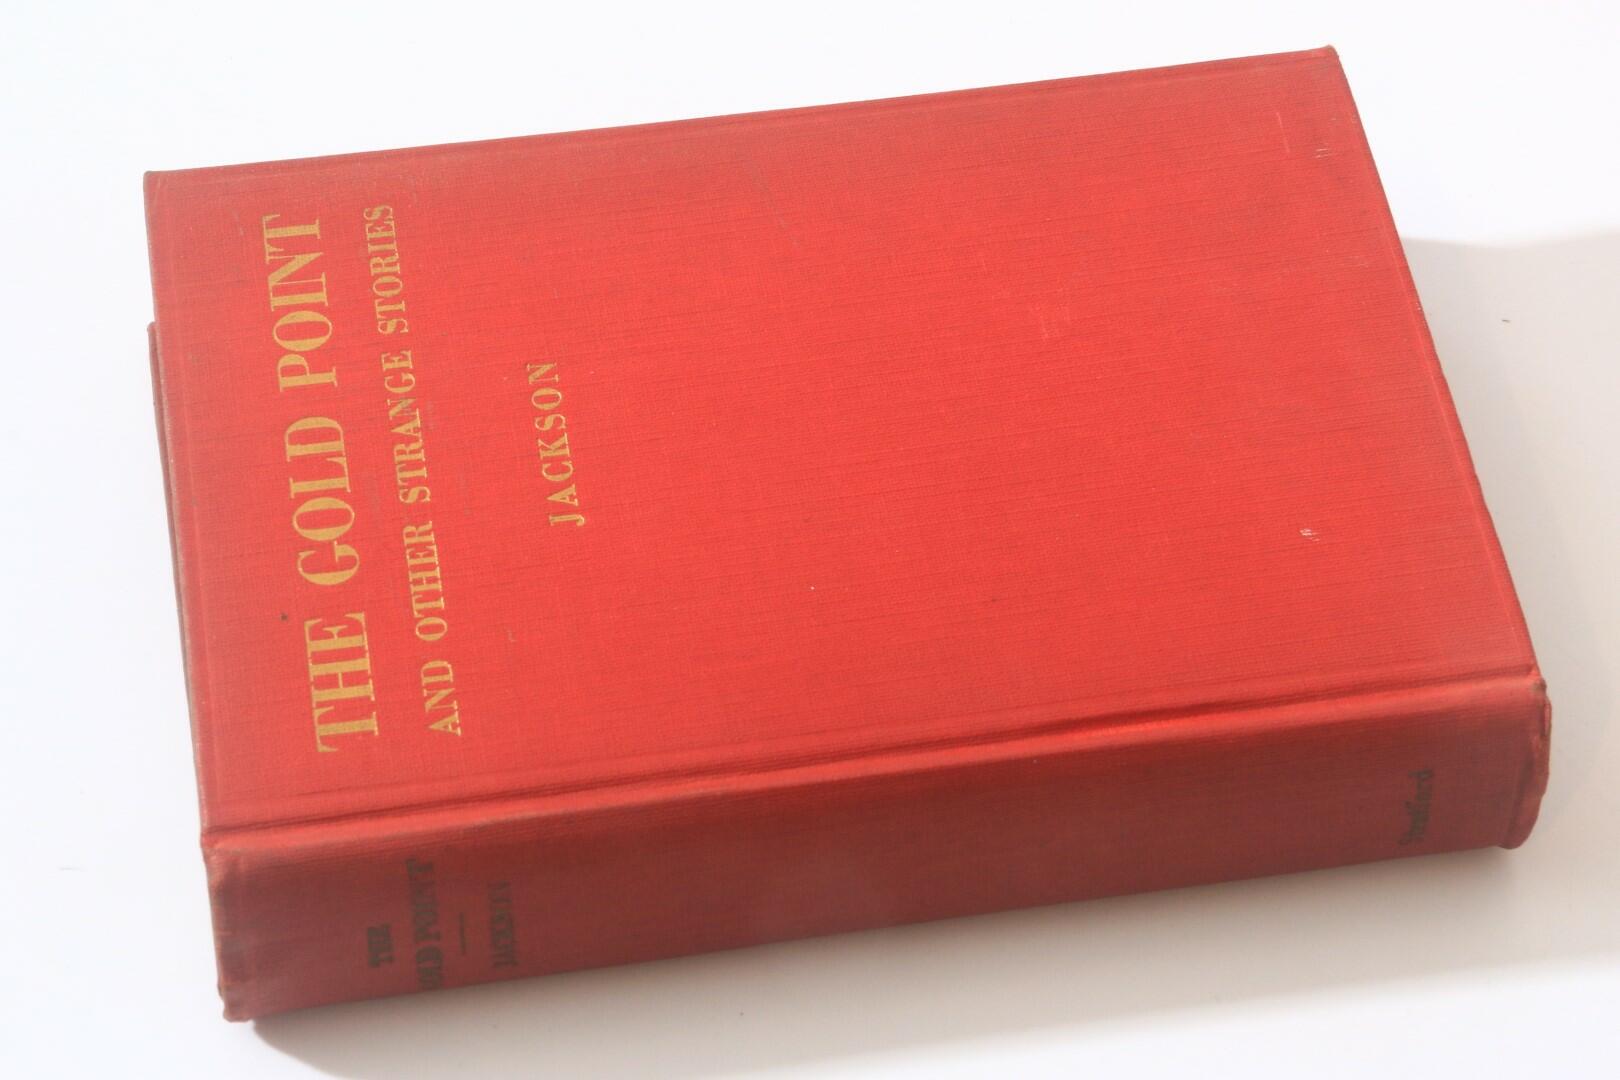 Charles Loring Jackson - The Gold Point and Strange Stories - The Stratford Company, 1926, First Edition.